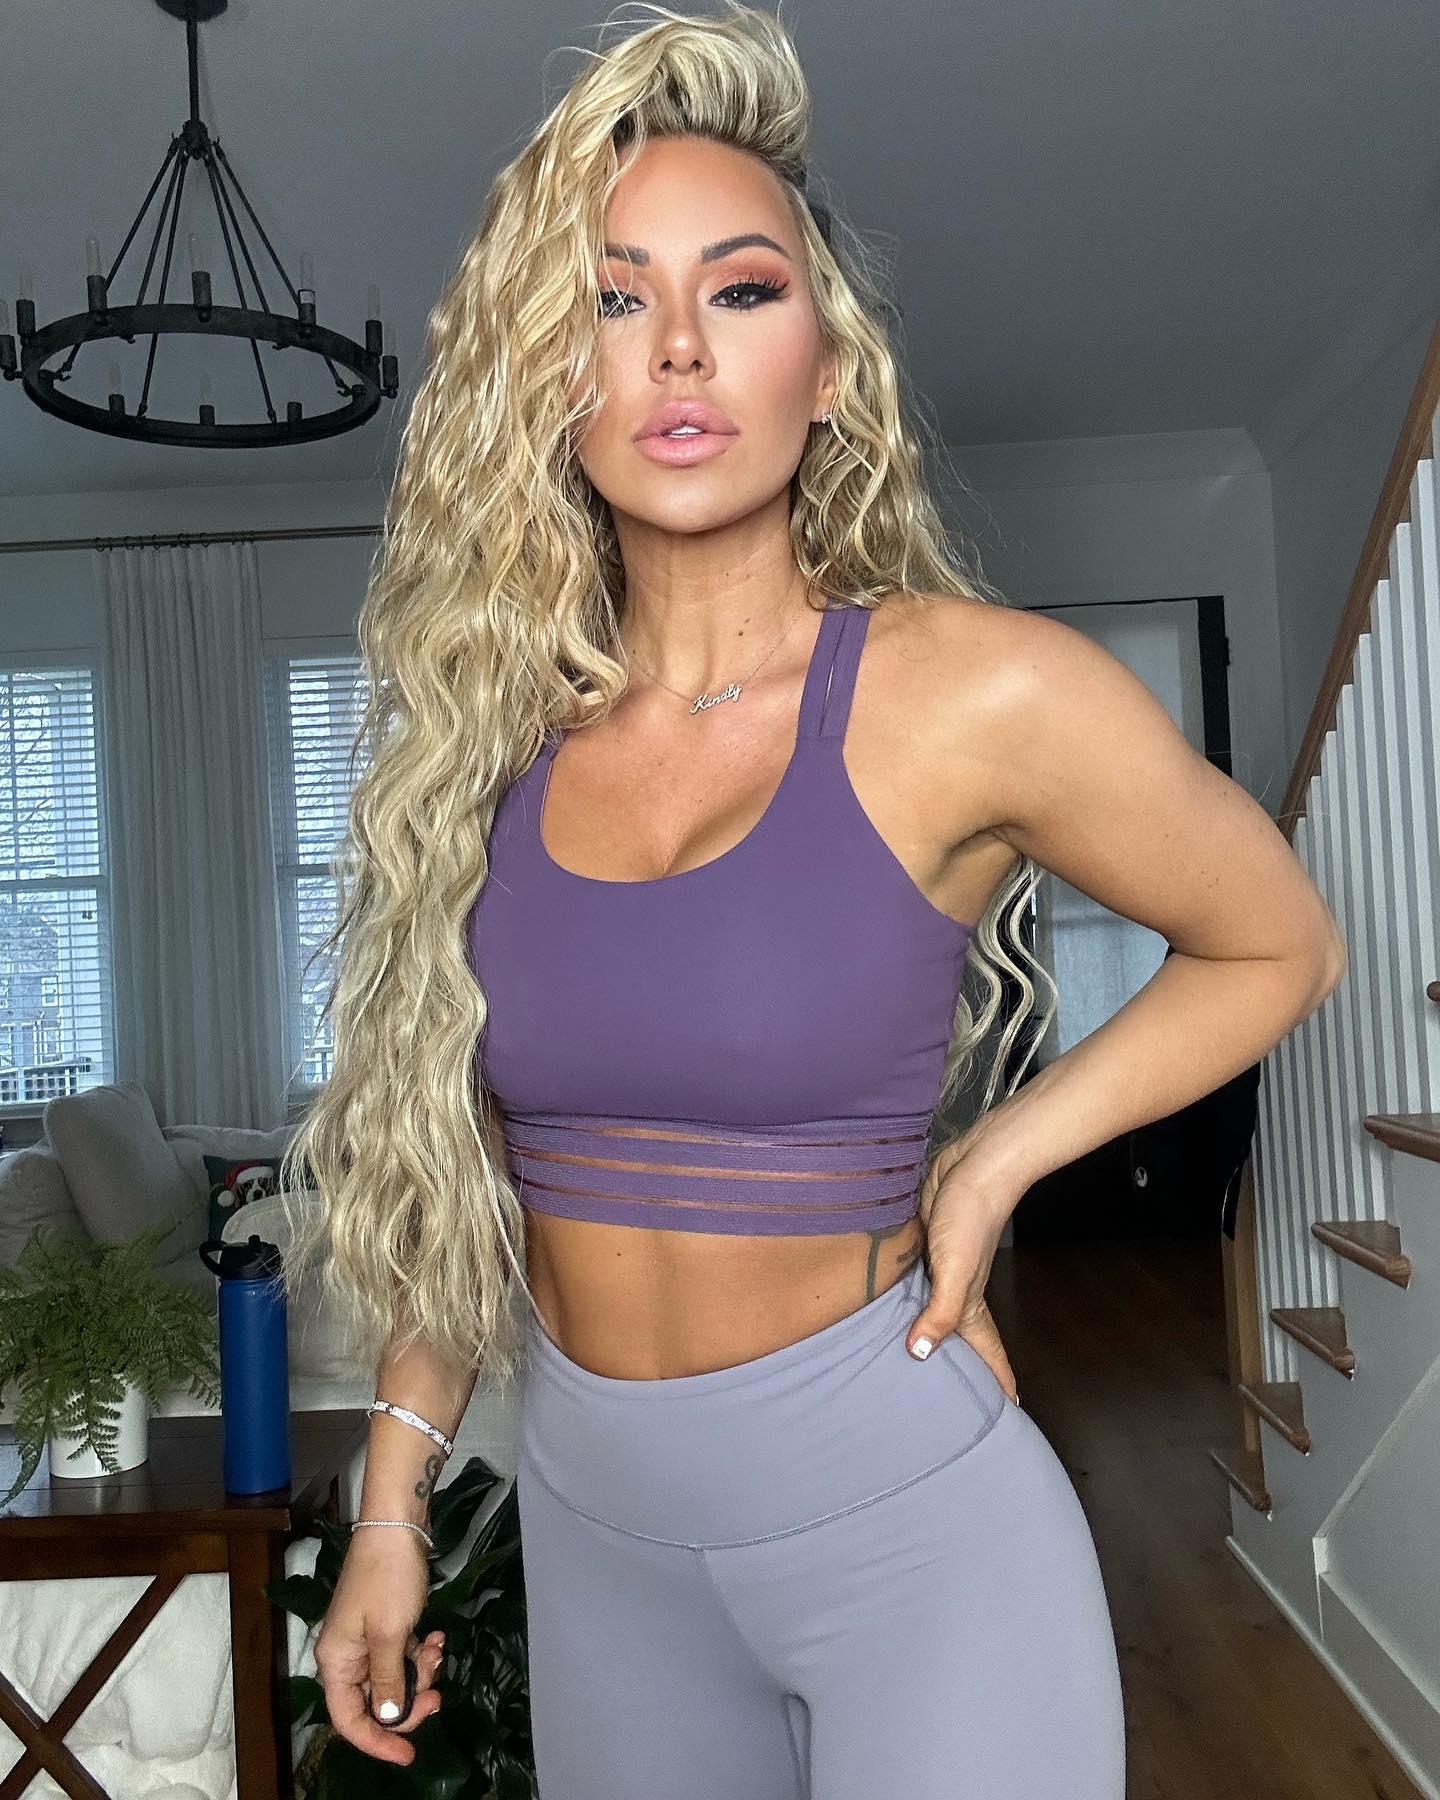 Kindly Myers shows off her new hair and a new outfit: a purple sports bra and gray CNC leggings